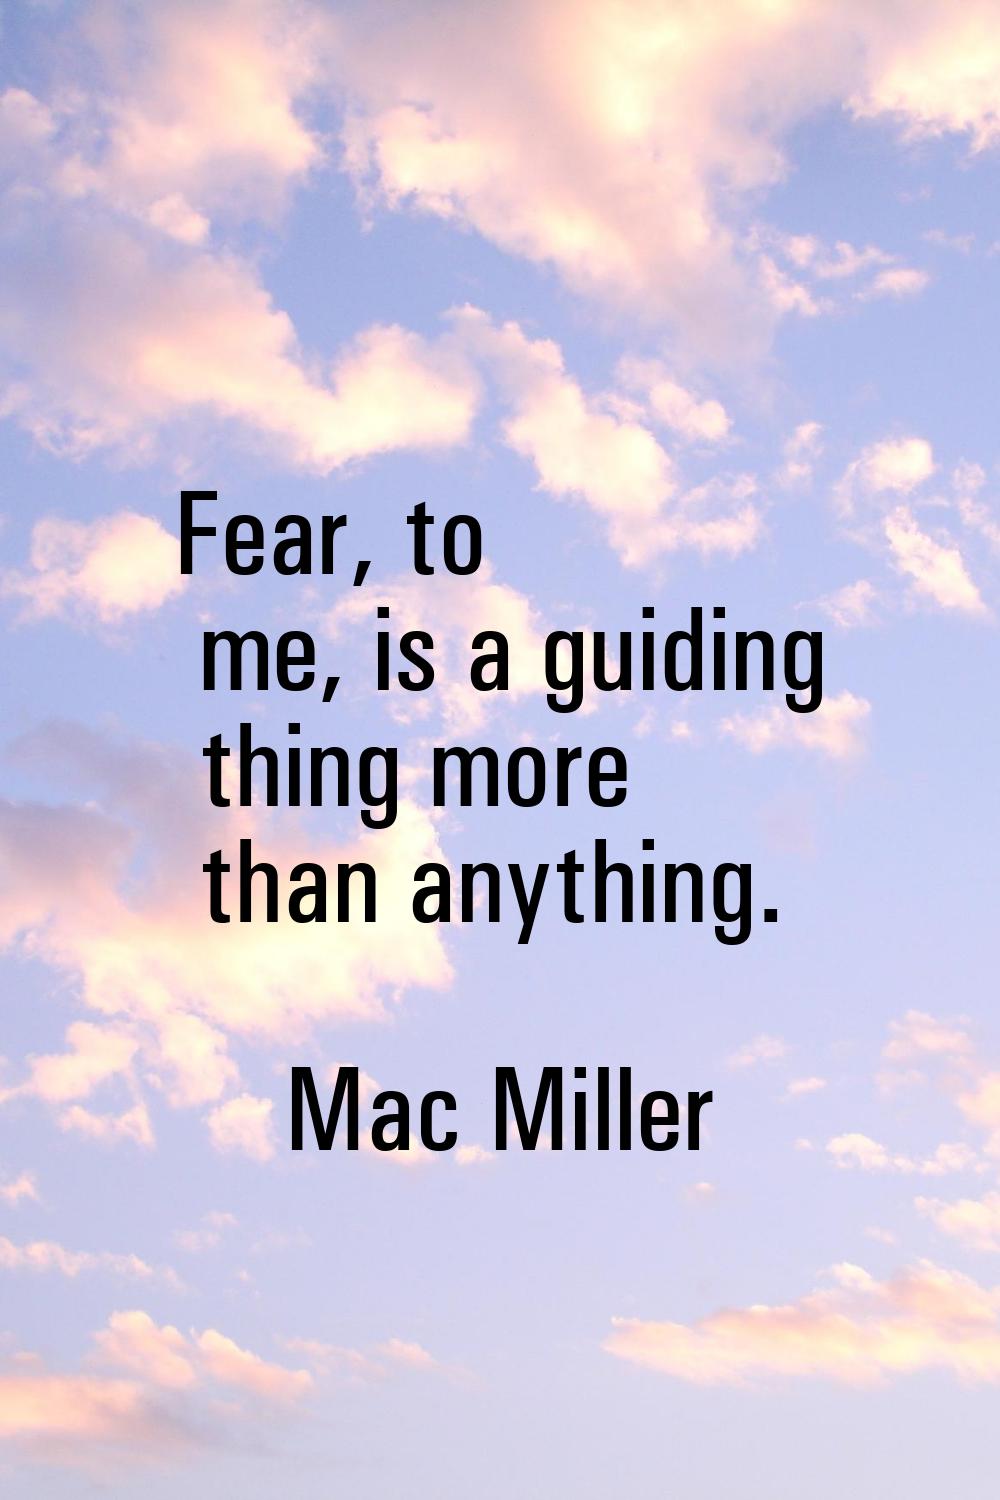 Fear, to me, is a guiding thing more than anything.